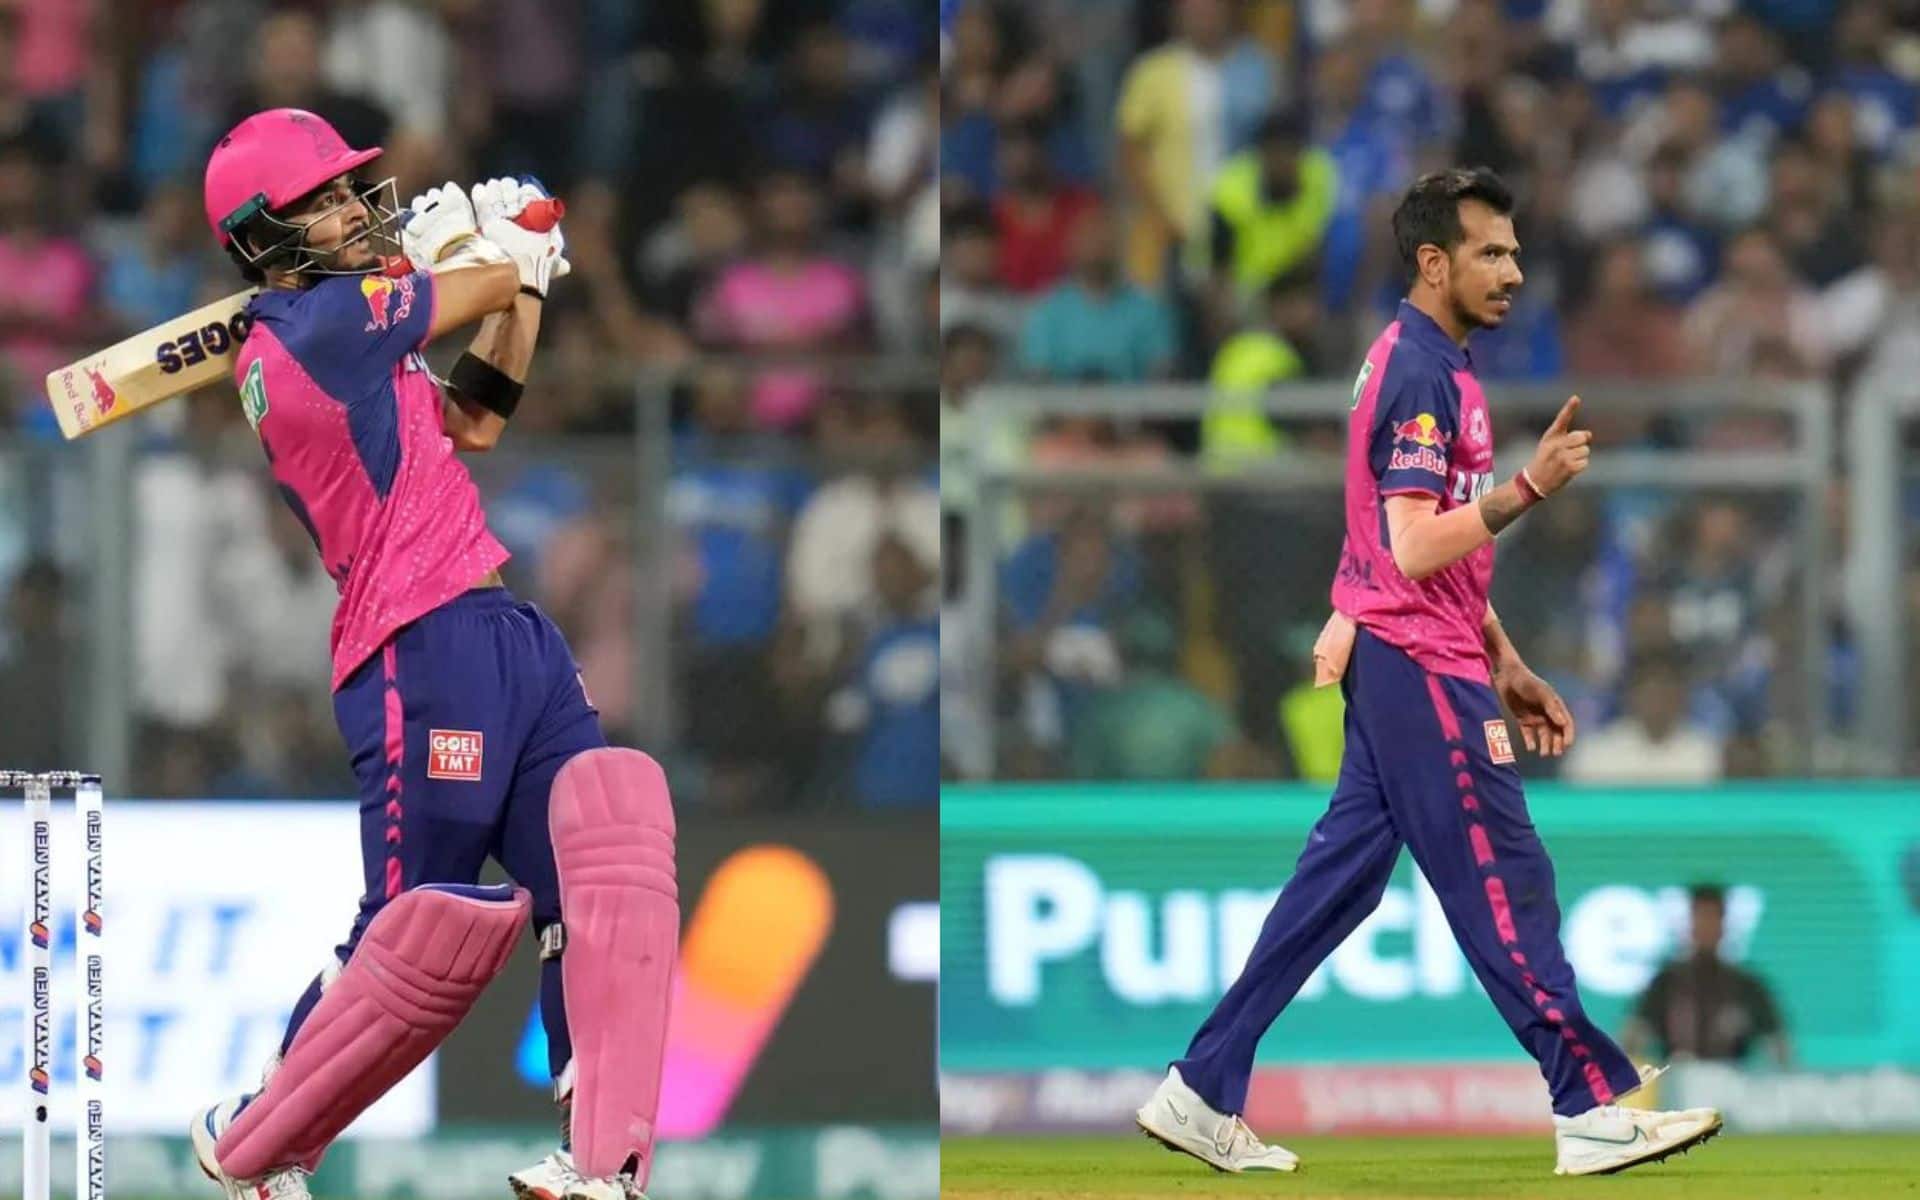 Riyan Parag and Yuzvendra Chahal could be important for RR in this match [iplt20.com]